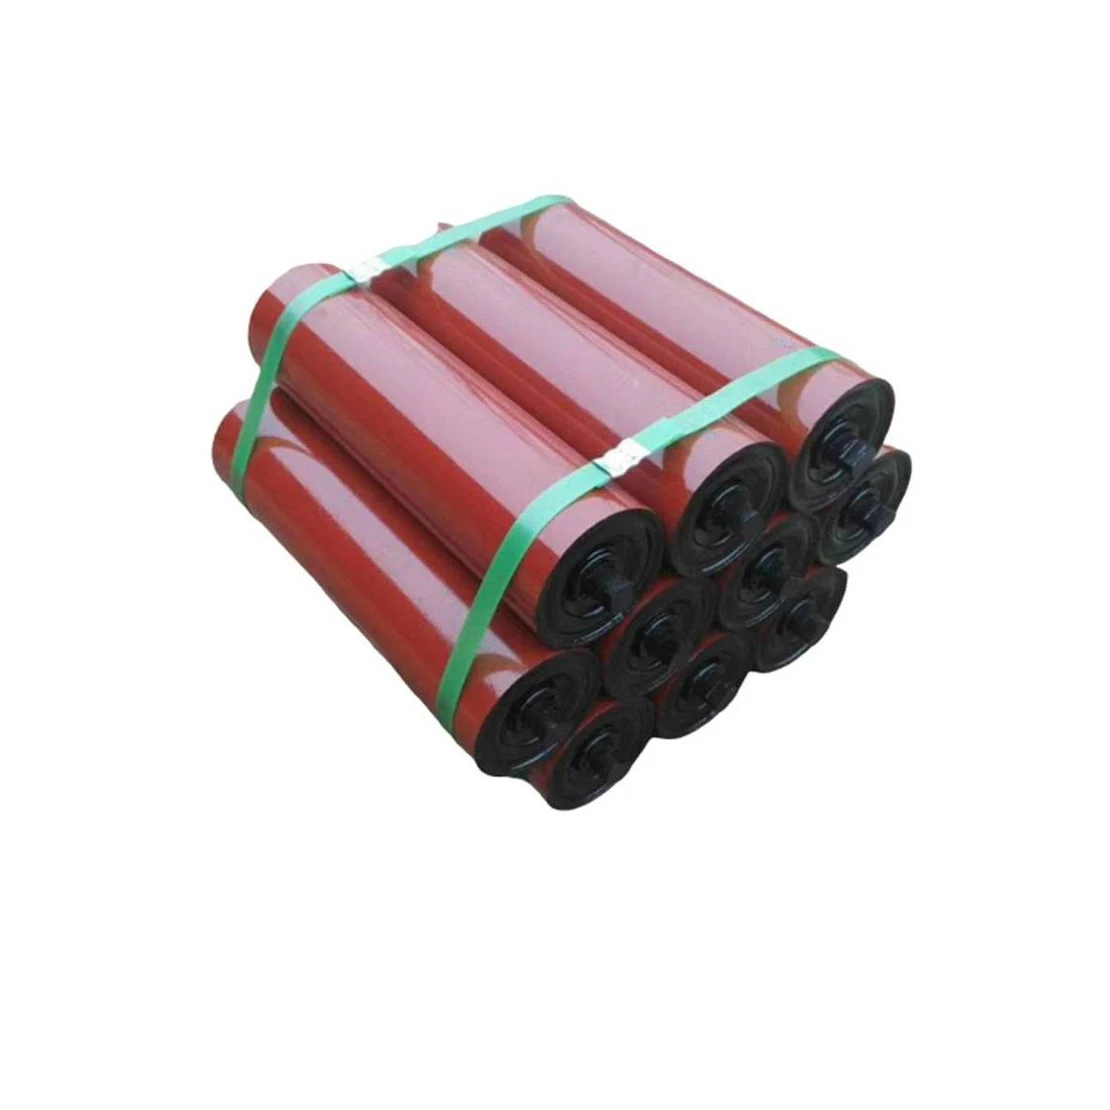 Durable In Use Steel pipe Smooth operation Roller for stable quality